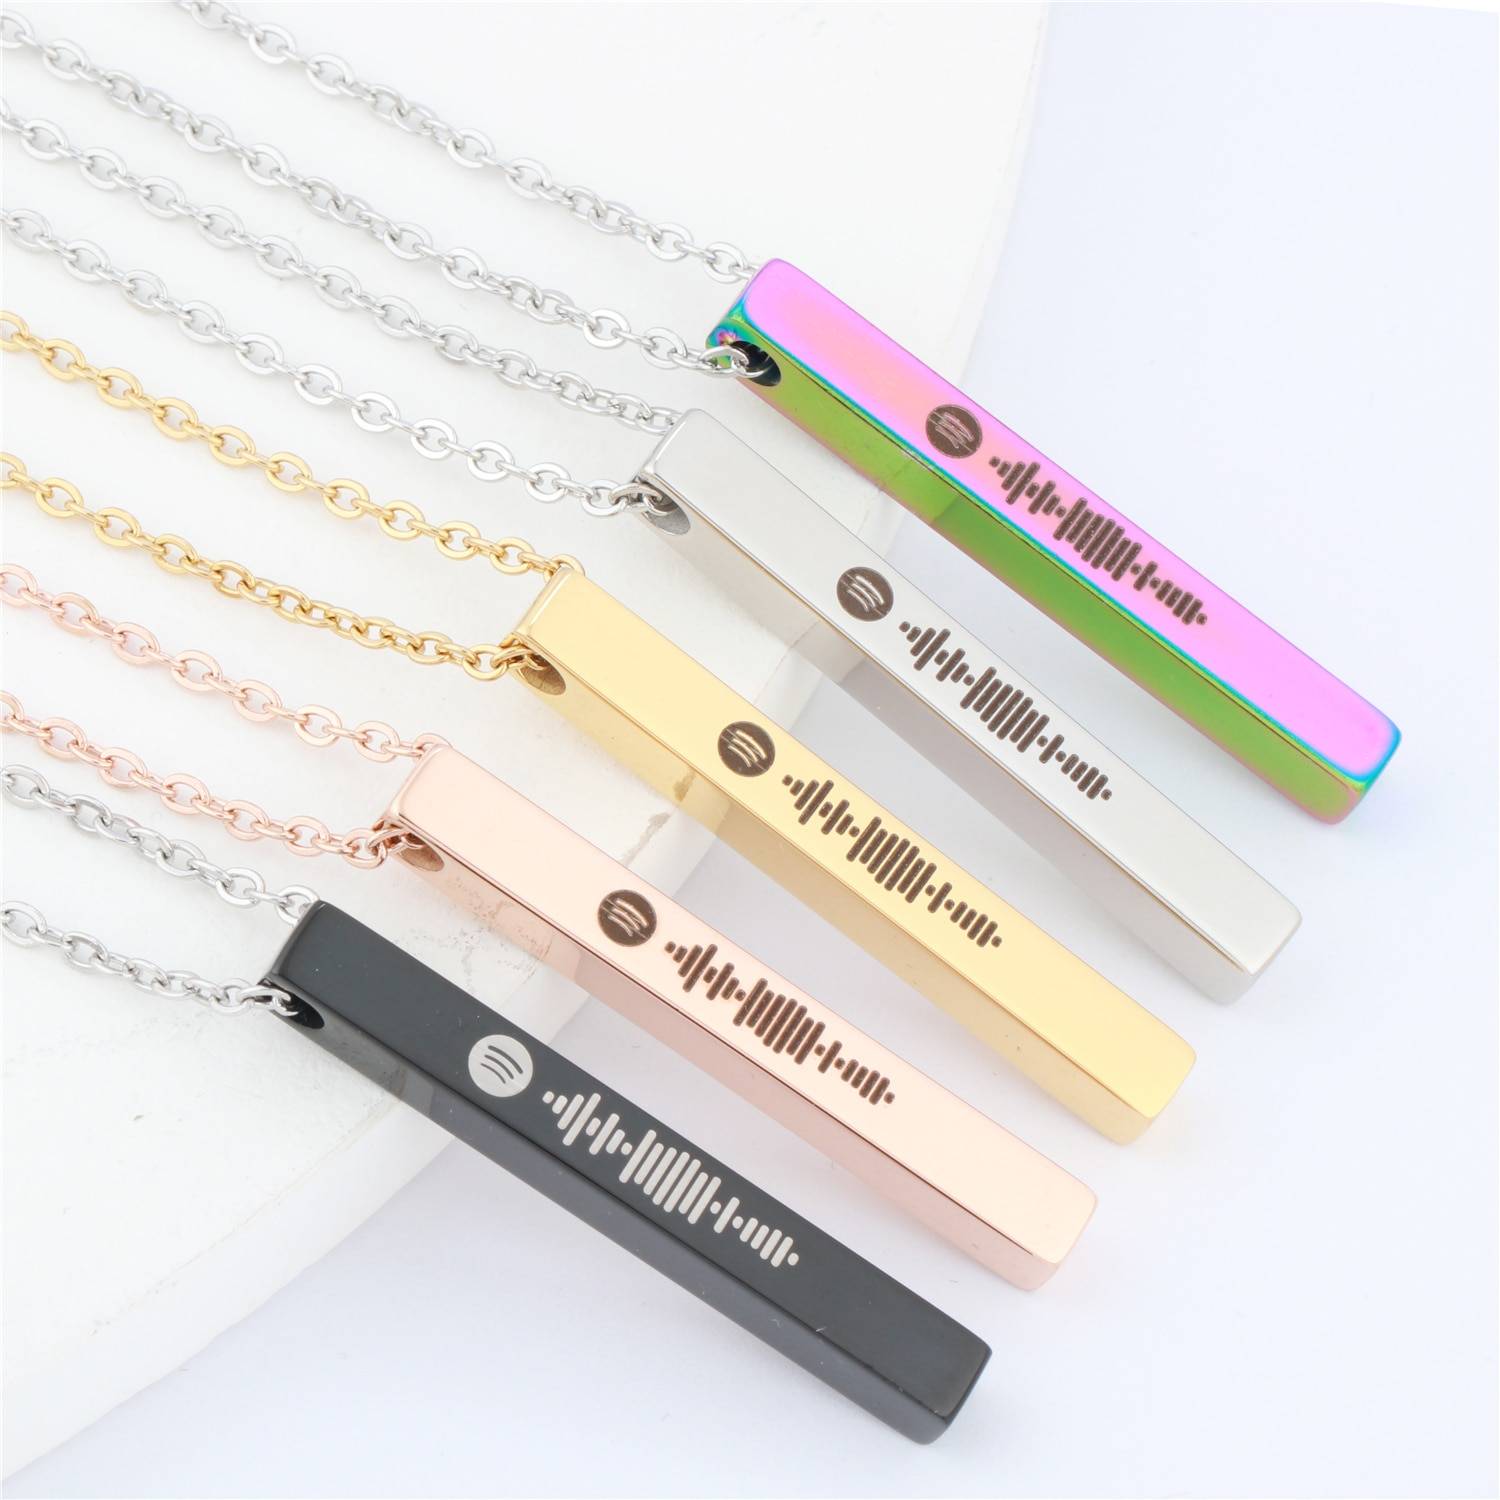 Customised Spotify Music Code Pendant Necklace – ISLA Men Necklaces Necklaces Pendant Necklace Personalised Necklace 8d255f28538fbae46aeae7: Black|Gold|Rainbow|Rose Gold|Silver